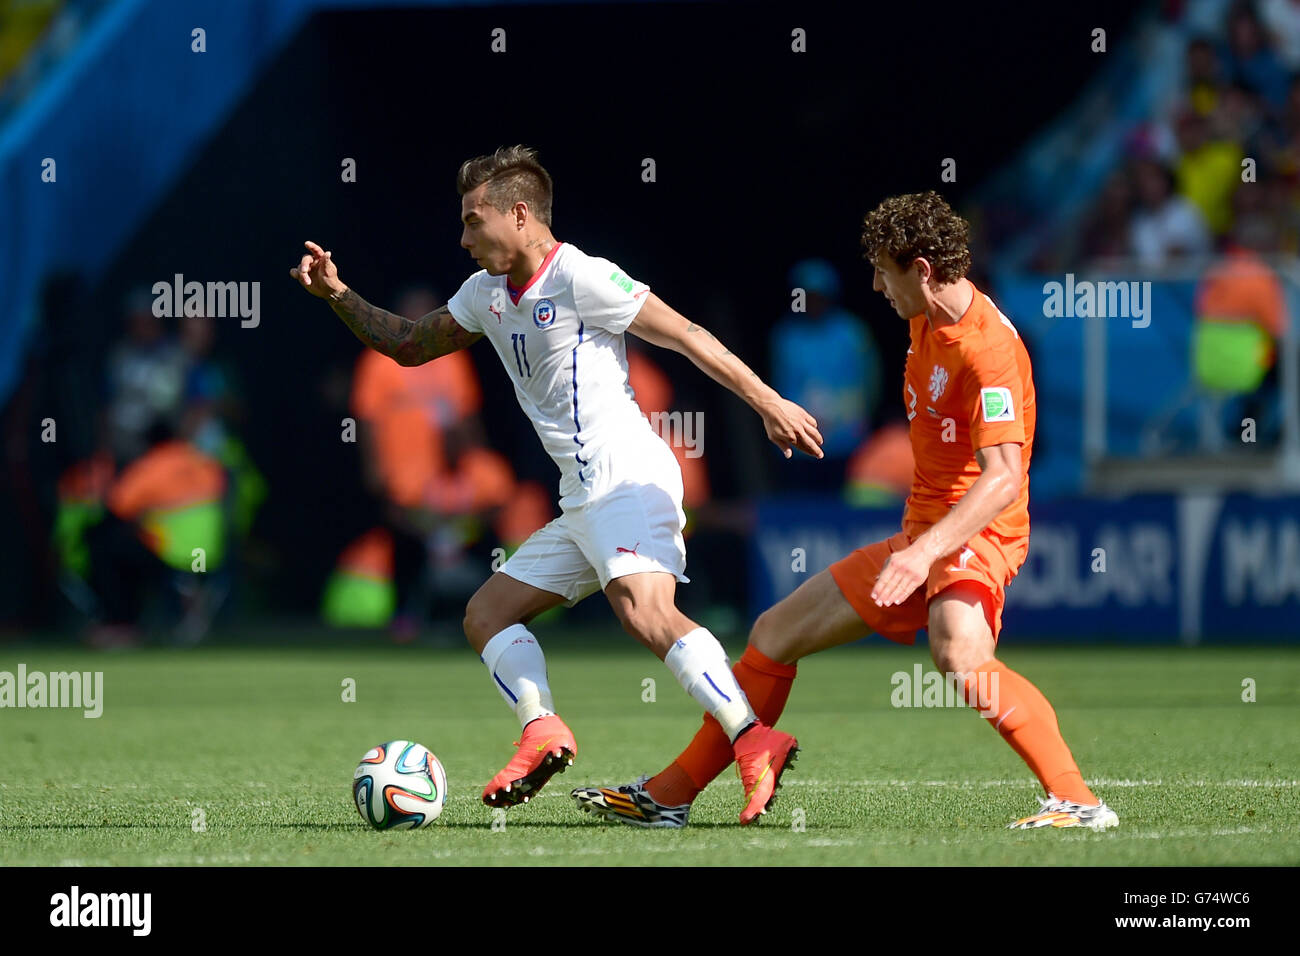 Soccer - FIFA World Cup 2014 - Group B - Netherlands v Chile - Arena Corinthians. Chile's Eduardo Vargas battles for the ball with Netherlands' Daryl Janmaat Stock Photo